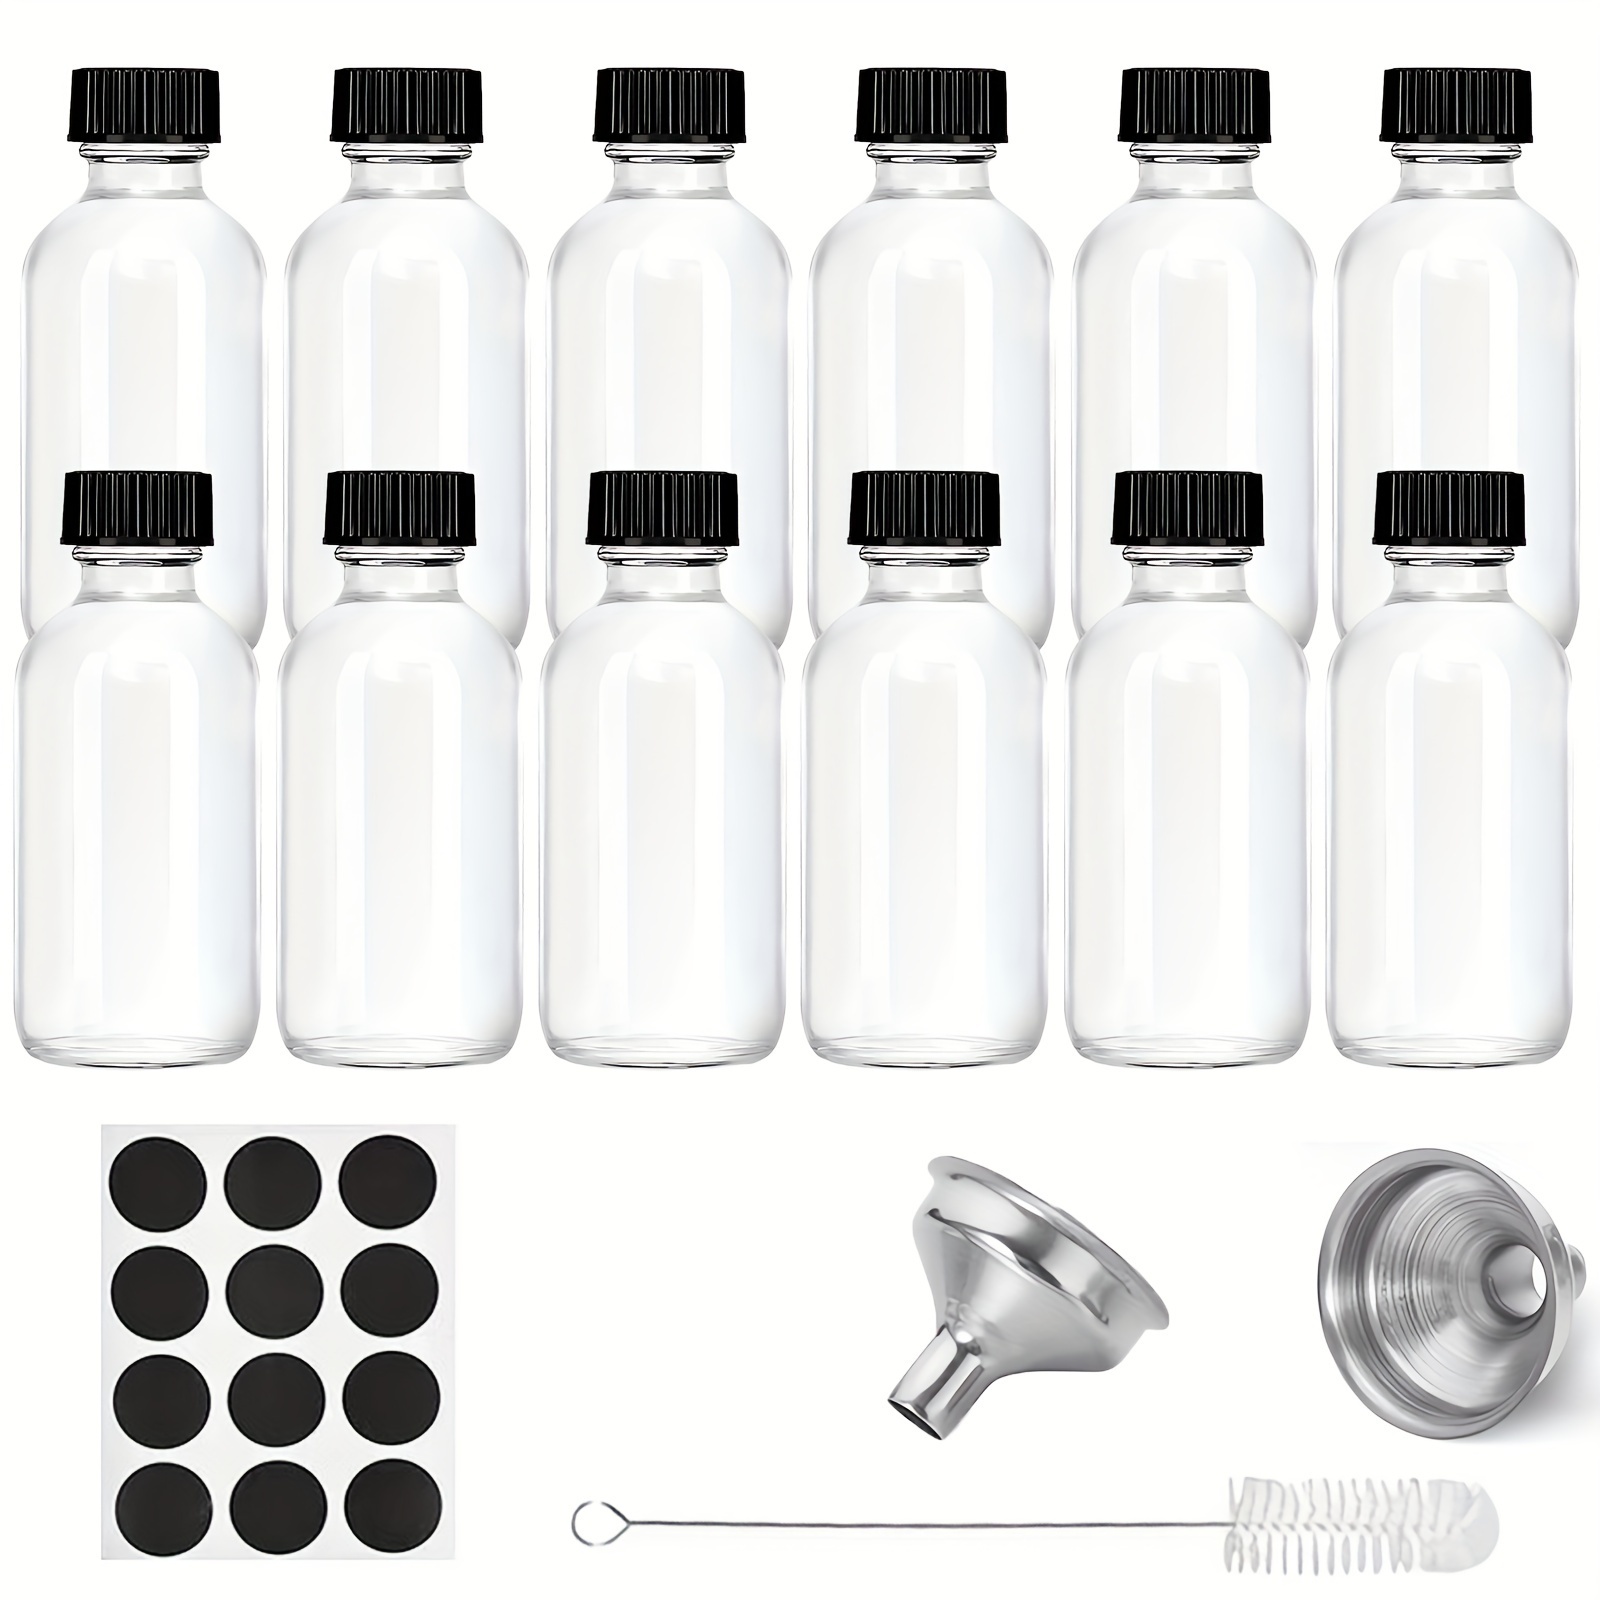 12pcs Glass Bottles With Lids And 2 Stainless Steel Funnels 2 Oz 60ml, Small Clear Glass Bottles For Potion, Juice, Wellness, Ginger Shots, Whiskey, Liquids, Mini Travel Essential Bottles, Kitchen Stuff, Travel Supplies